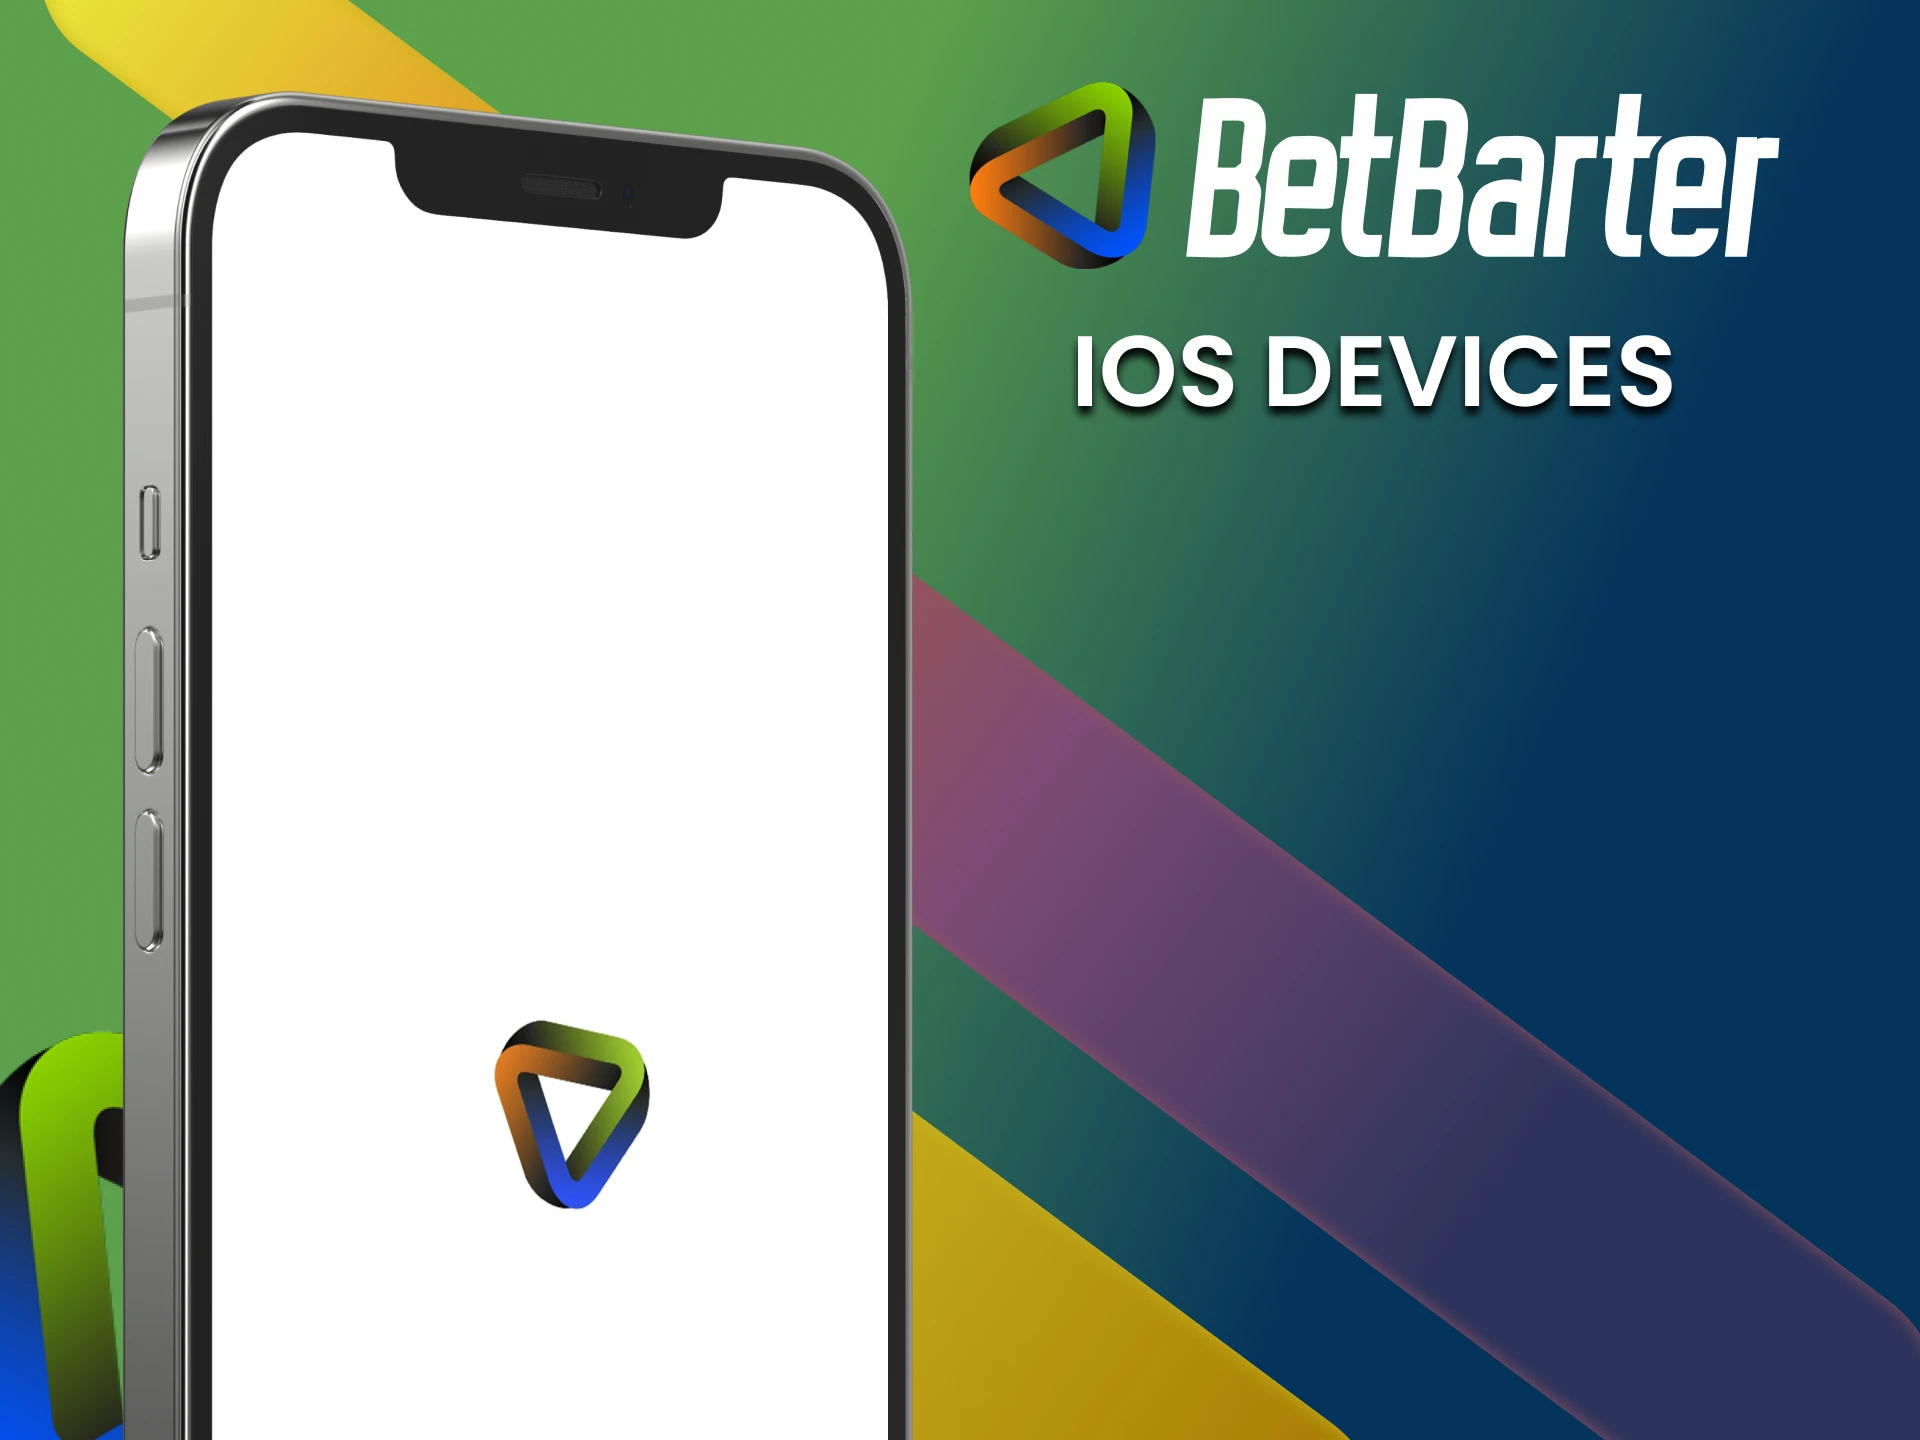 Requirements and compatible devices for using the BetBarter app on iOS.